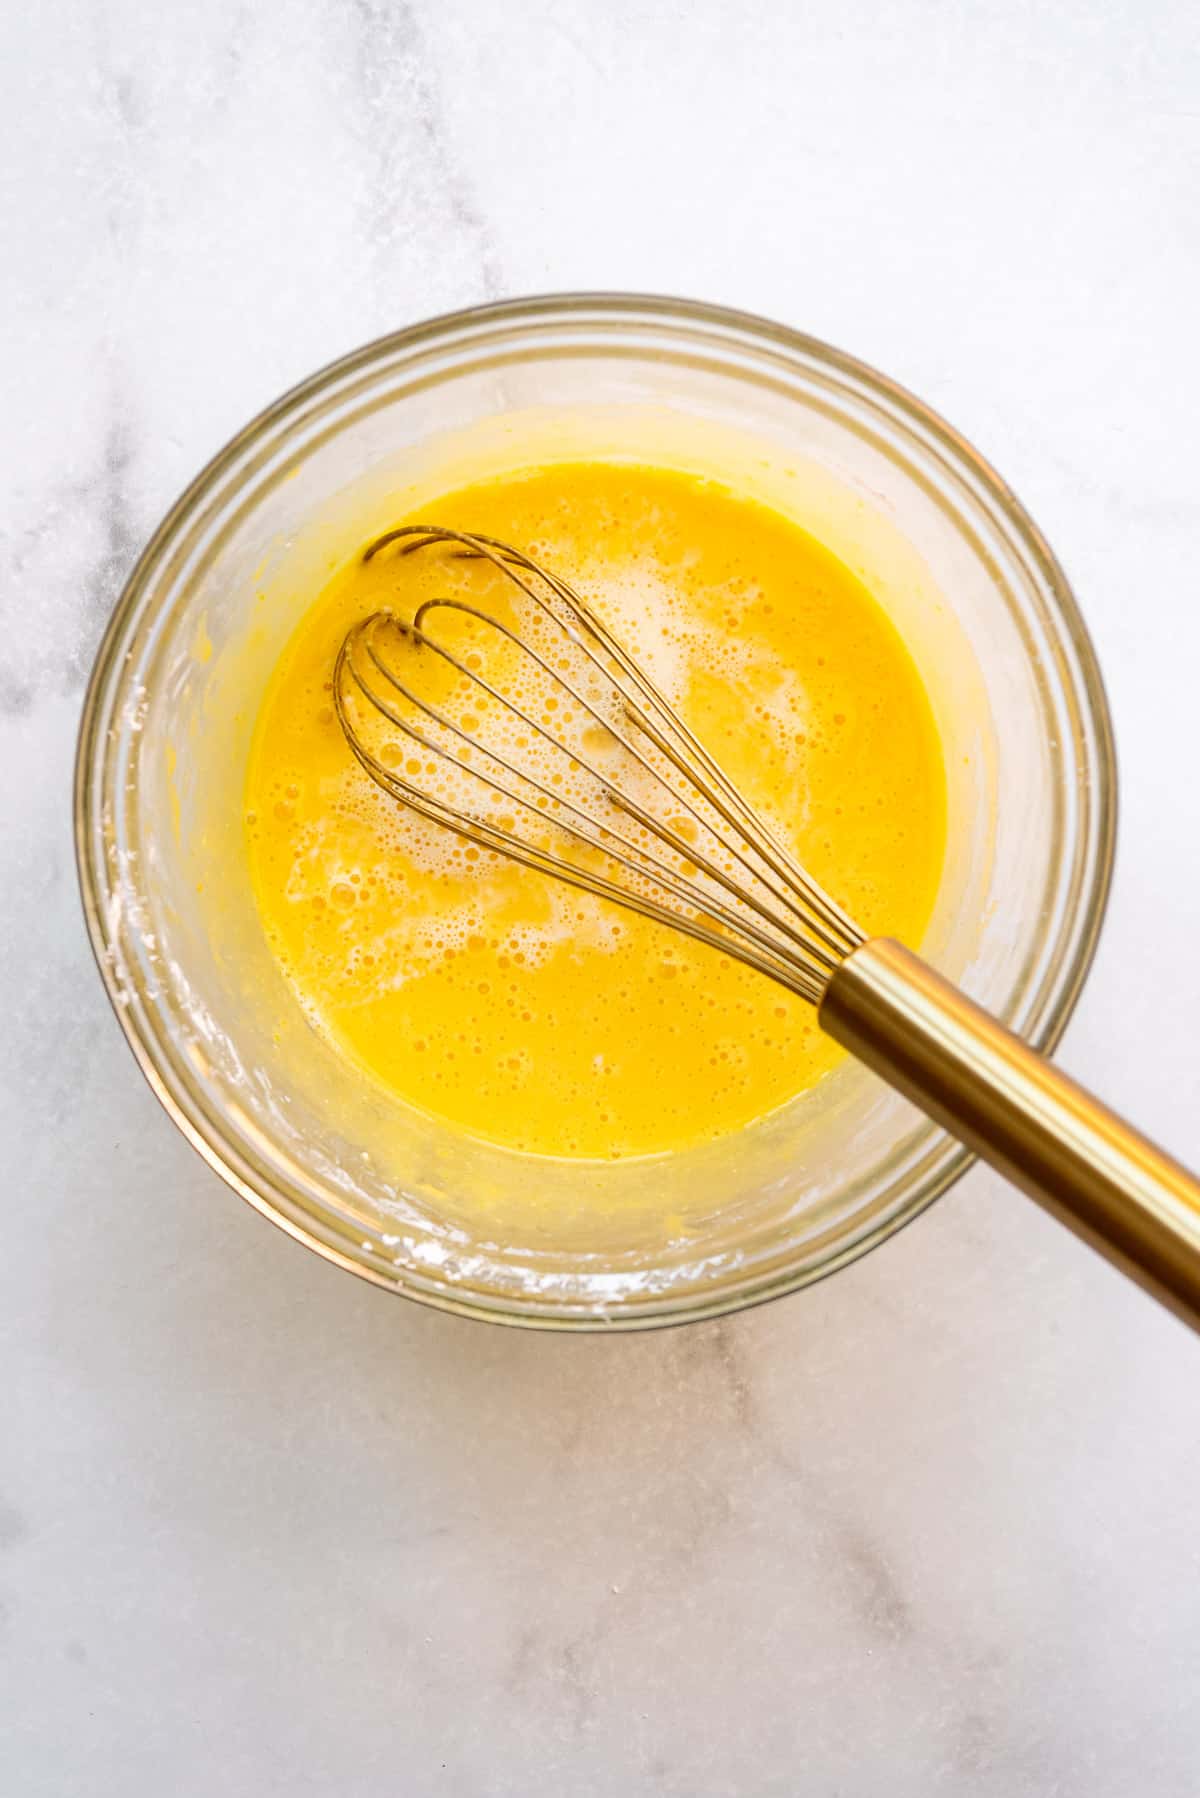 Adding heated milk and cream to an egg yolk and sugar mixture in a glass bowl.